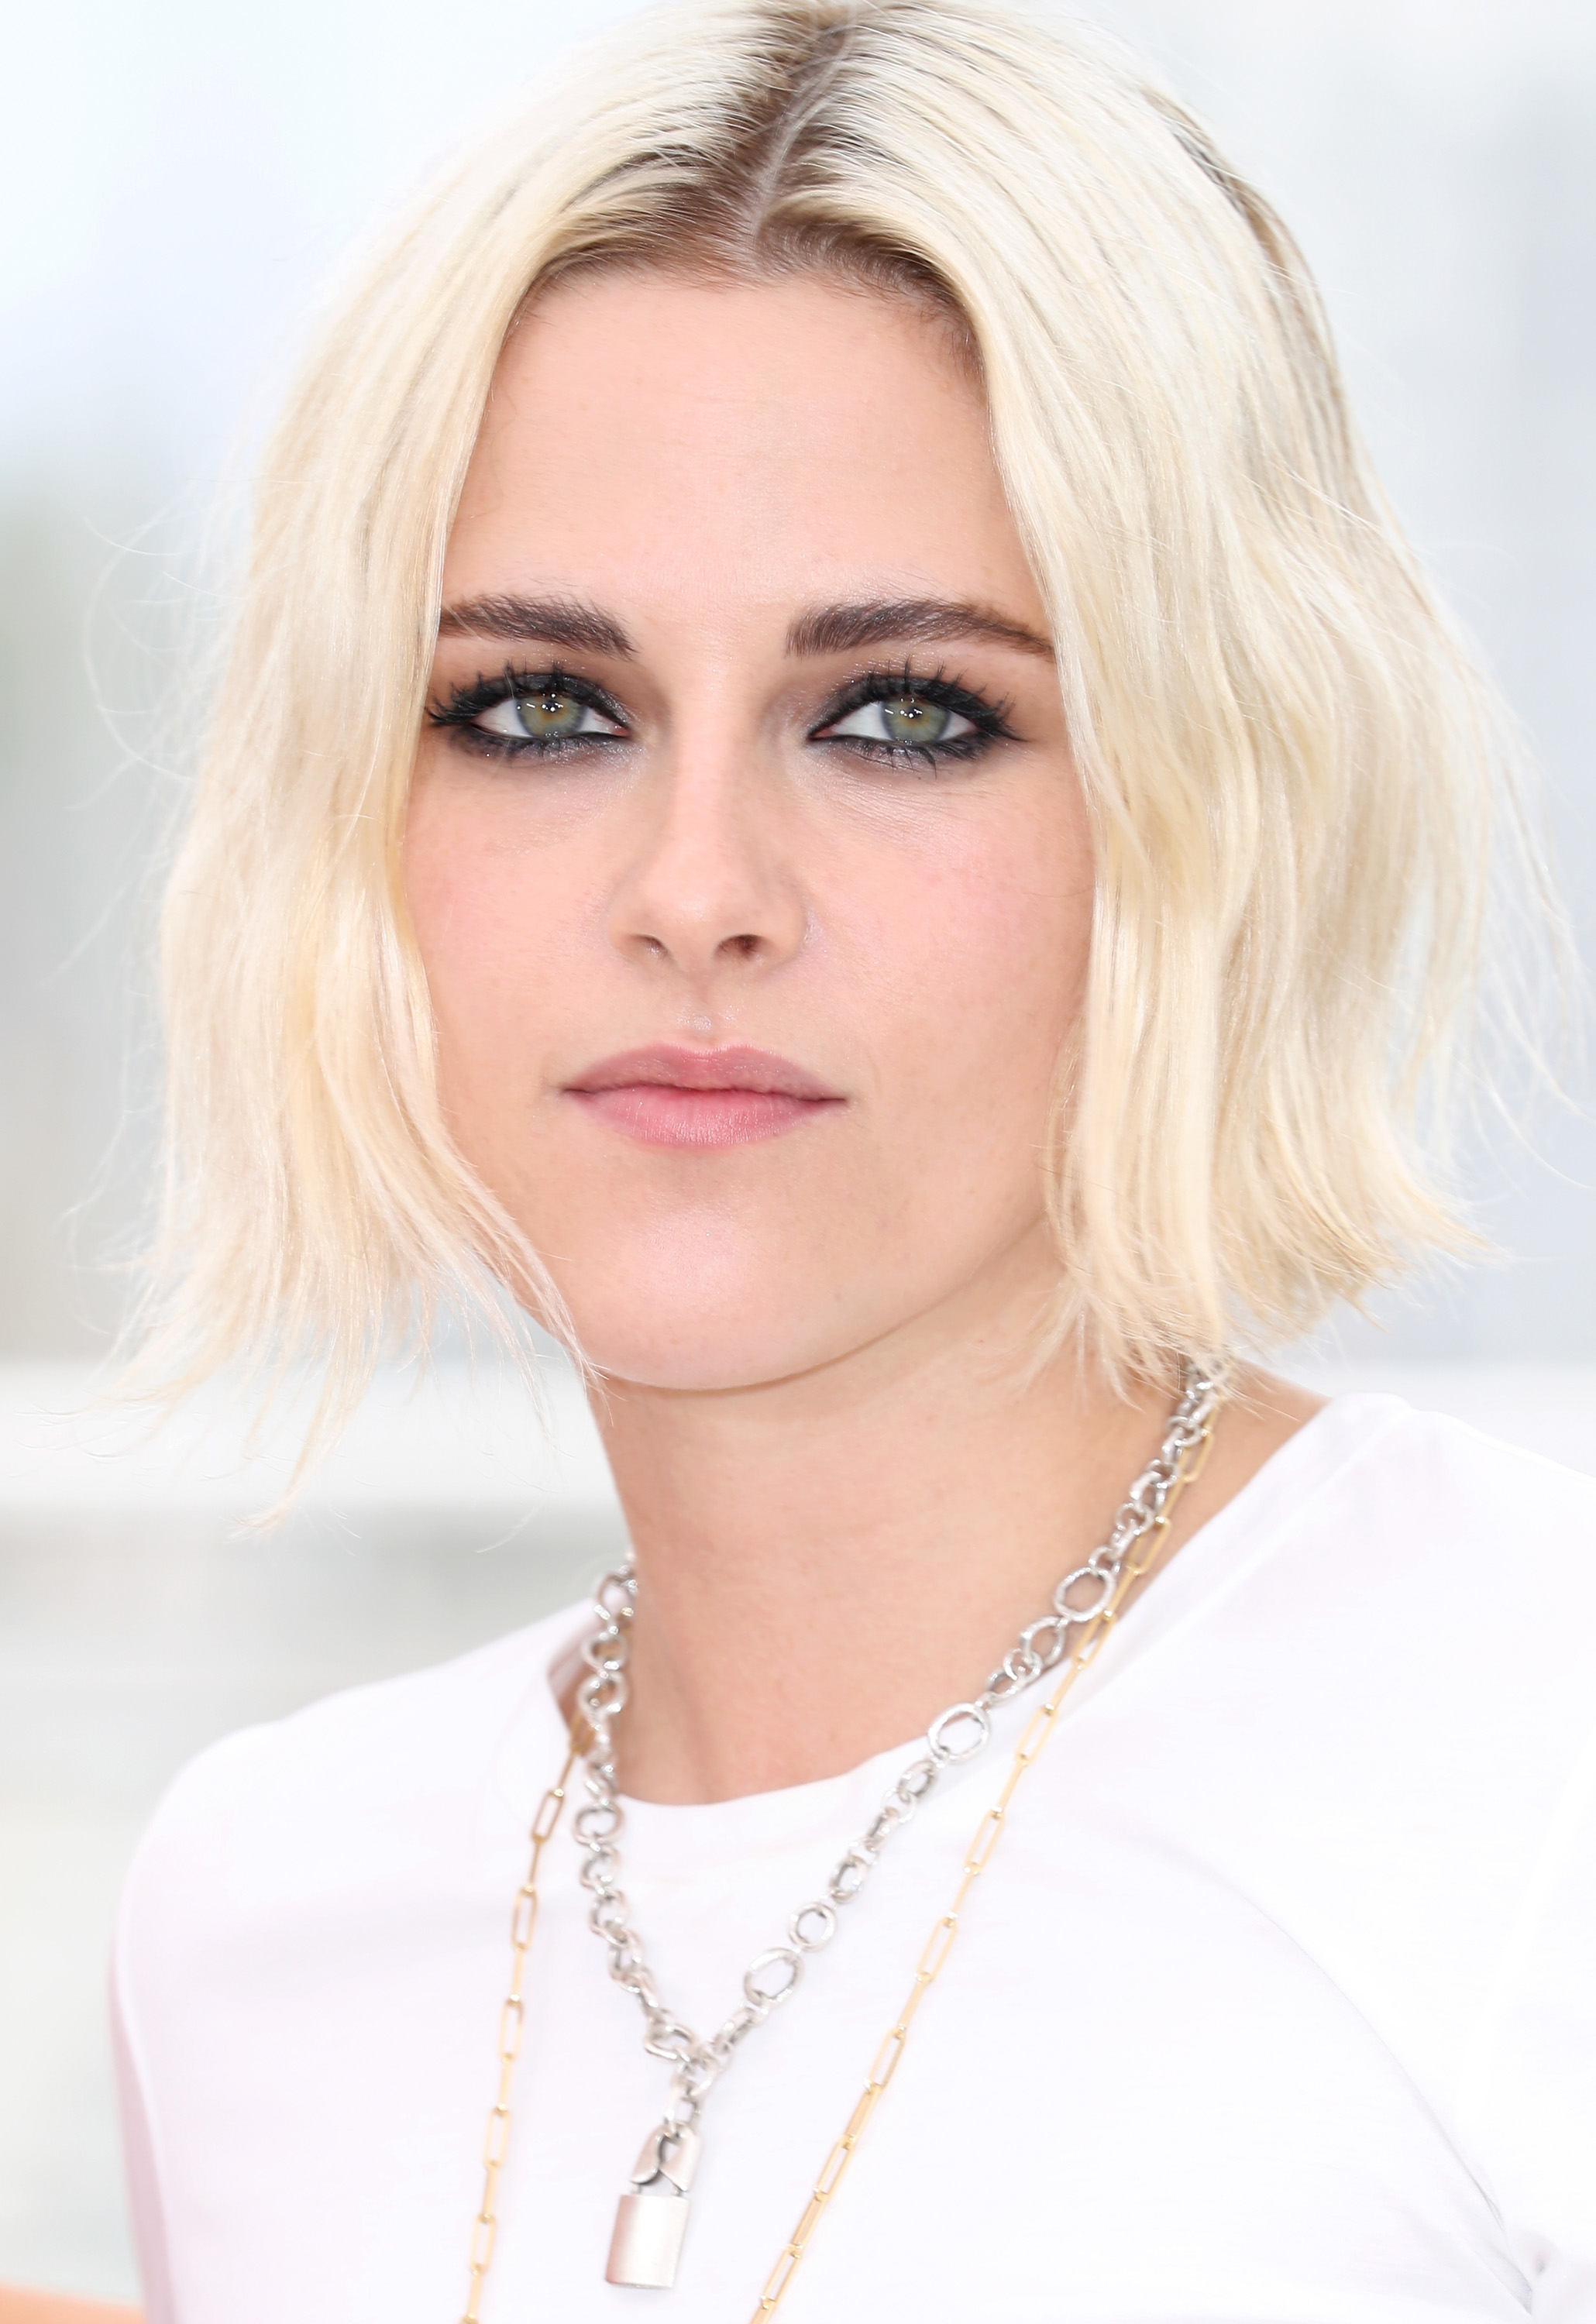 CANNES, FRANCE - MAY 11: Kristen Stewart attends the "Cafe Society" Photocall during The 69th Annual Cannes Film Festival on May 11, 2016 in Cannes, France. (Photo by Andreas Rentz/Getty Images)